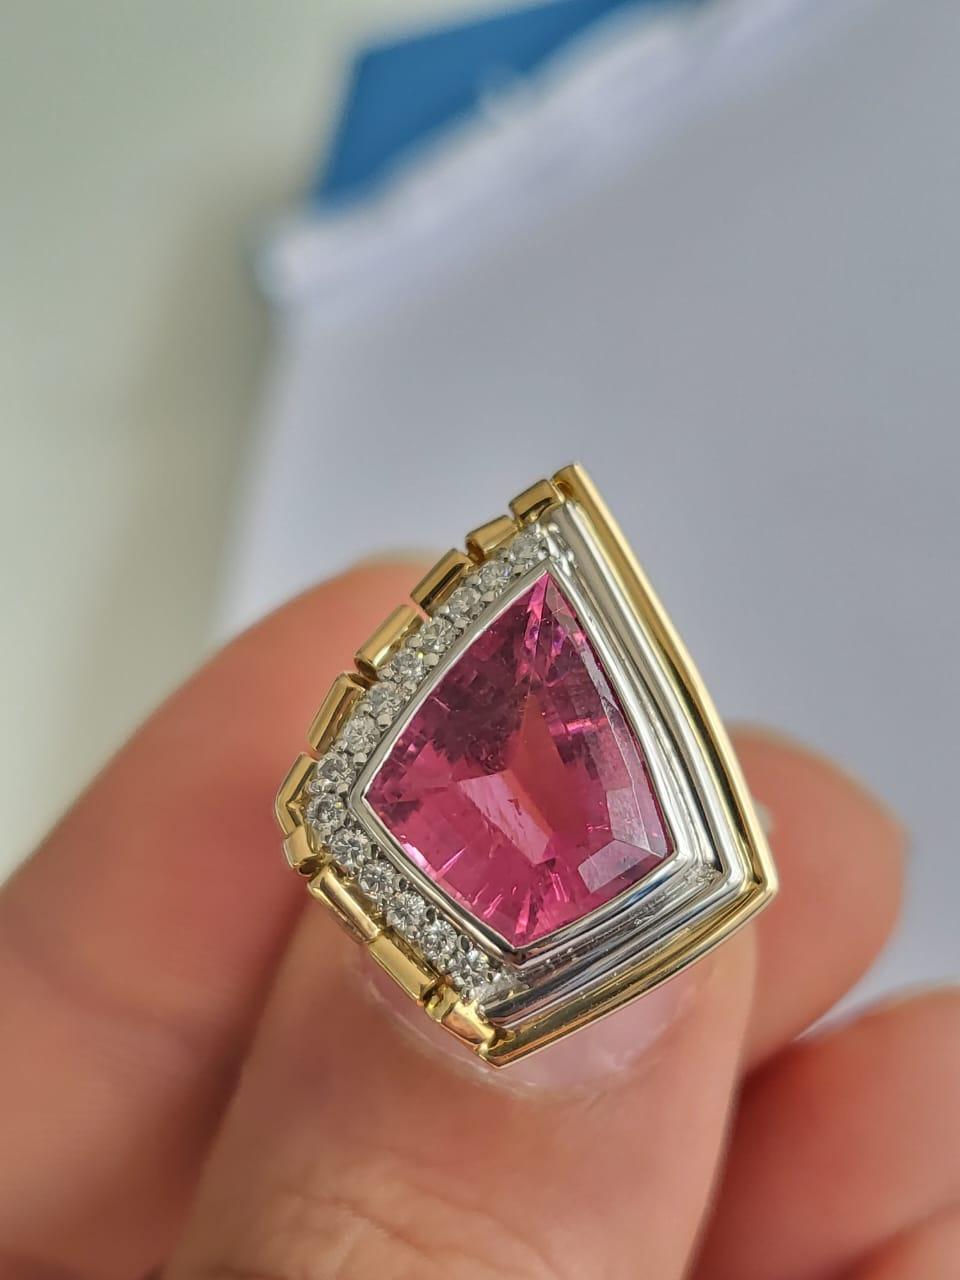 A very gorgeous and one of a kind, Rubellite Cocktail Engagement Ring set in 18K Yellow Gold & Platinum 900. The weight of the shield shaped Rubellite is 5.58 carats. The weight of the Diamonds is 0.19 carat. The combined metal weight is 8.35 grams.